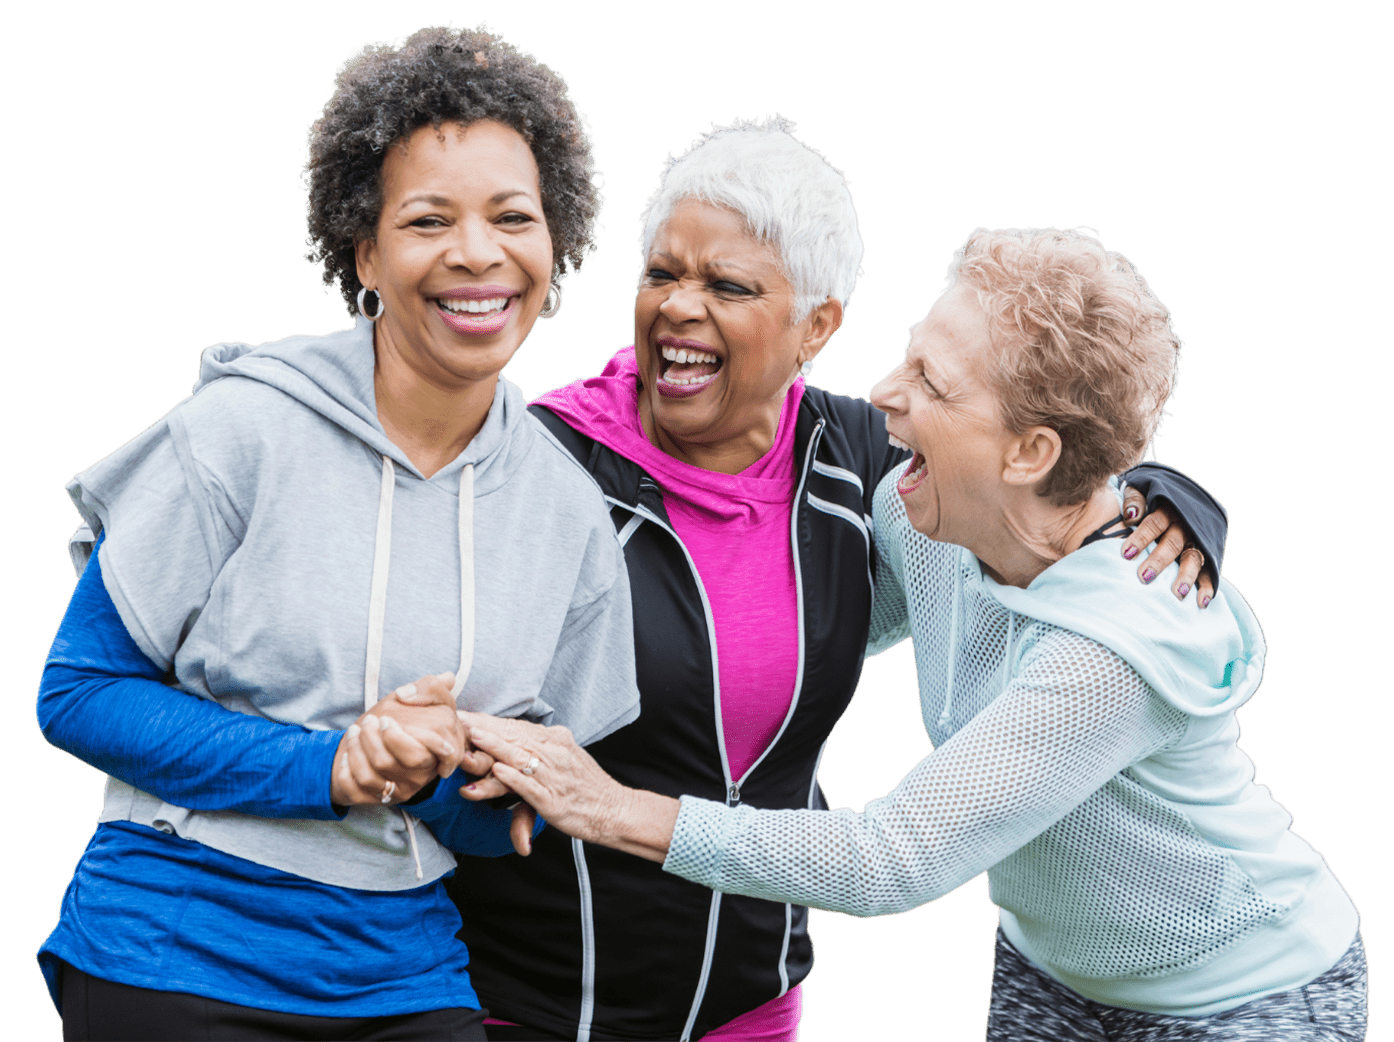 Three senior women in active attire laughing and embracing each other